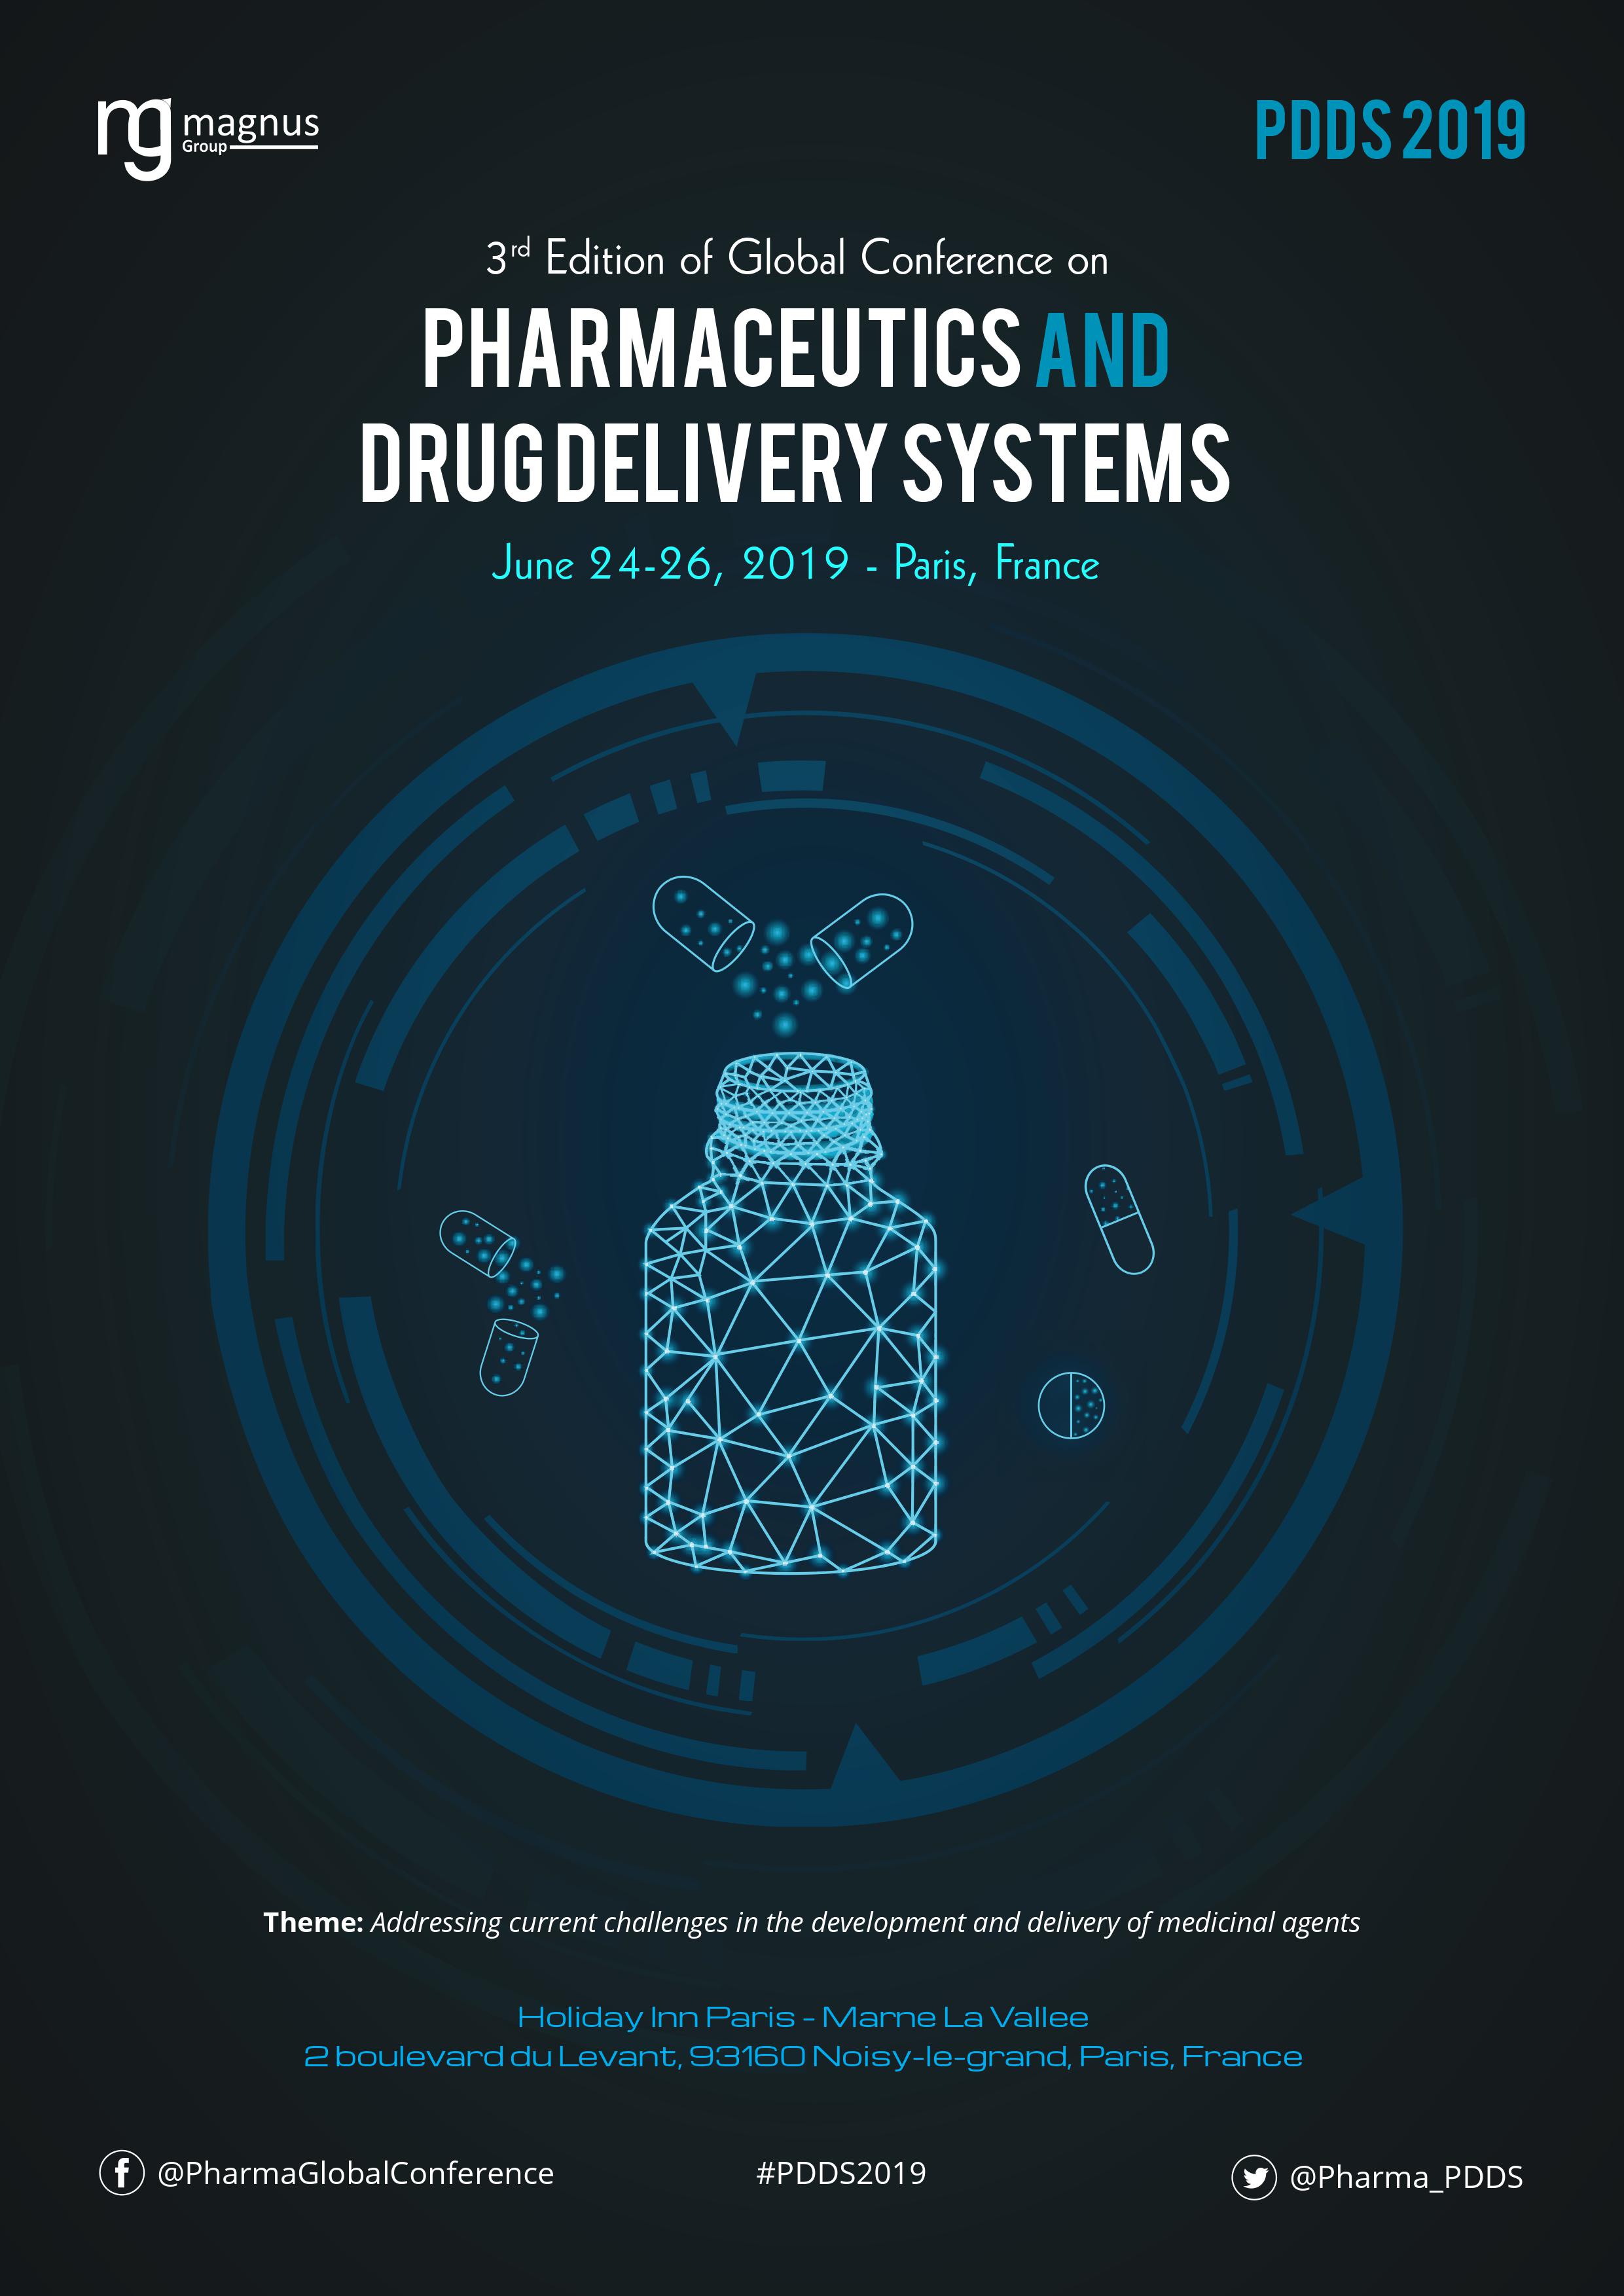 Global conference on Pharmaceutics and Drug Delivery Systems | Paris, France Event Book